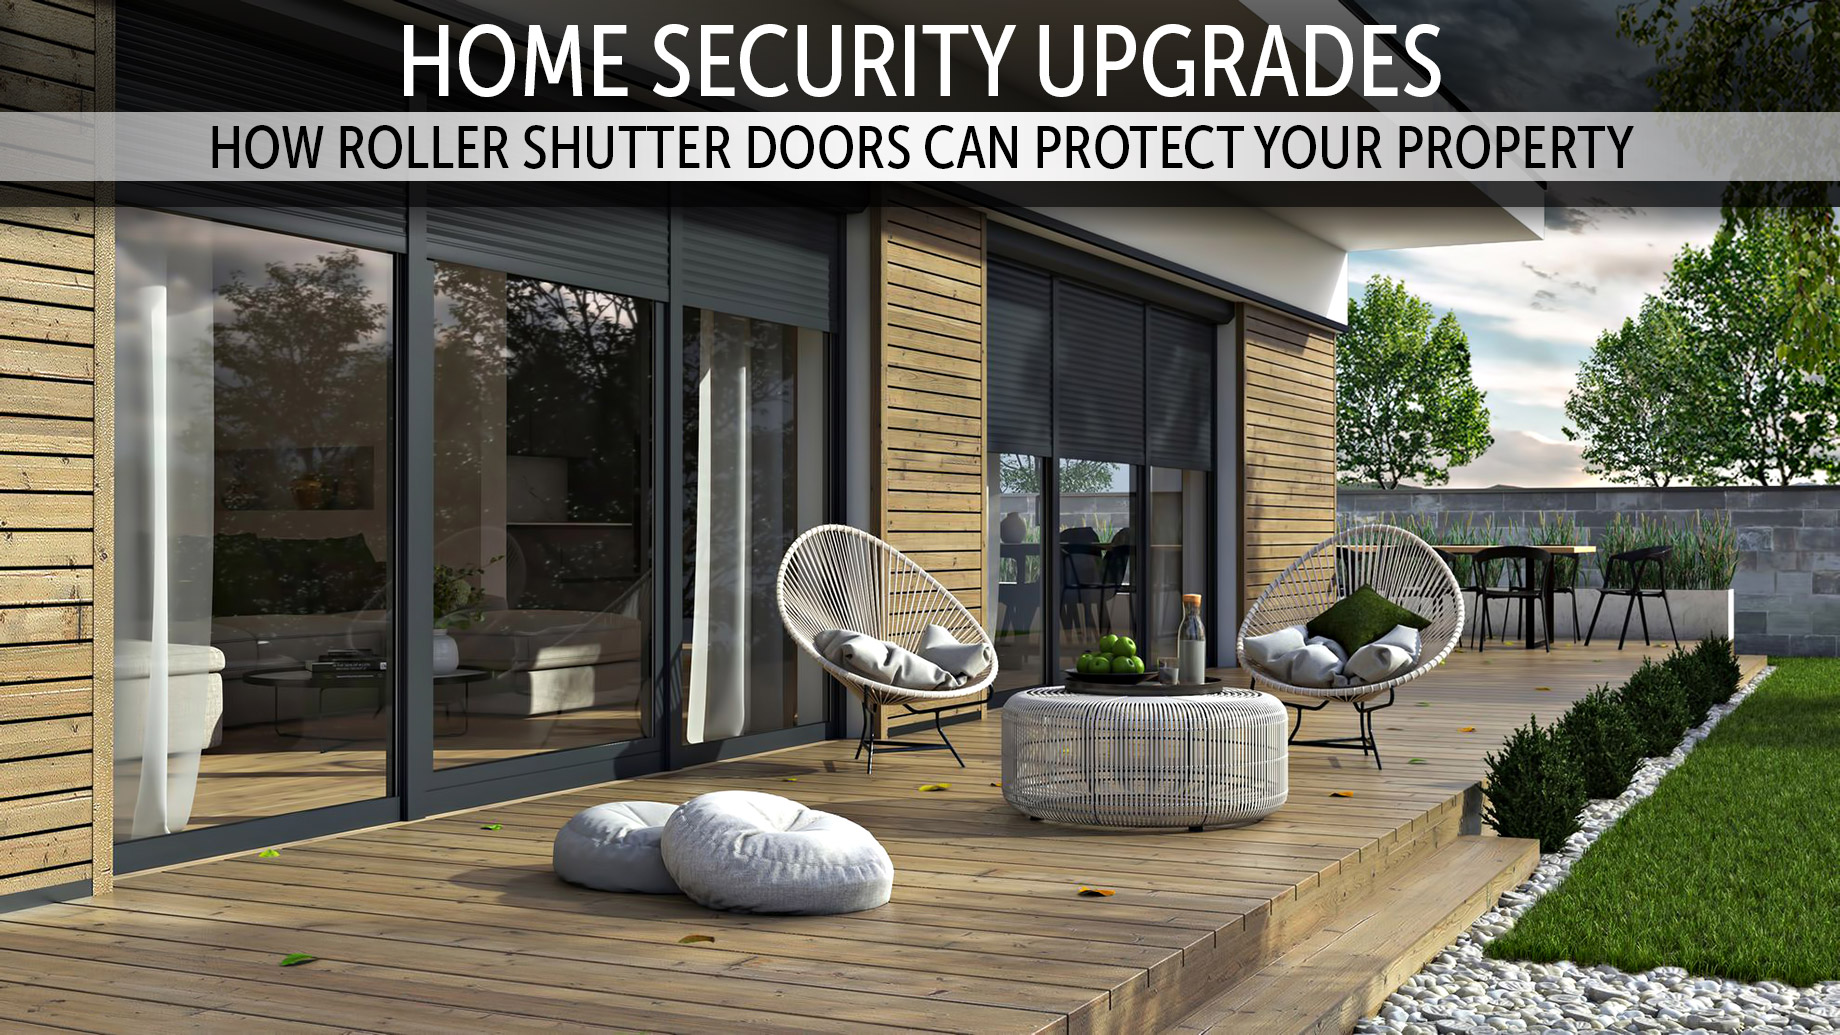 Home Security Upgrades - How Roller Shutter Doors Can Protect Your Property